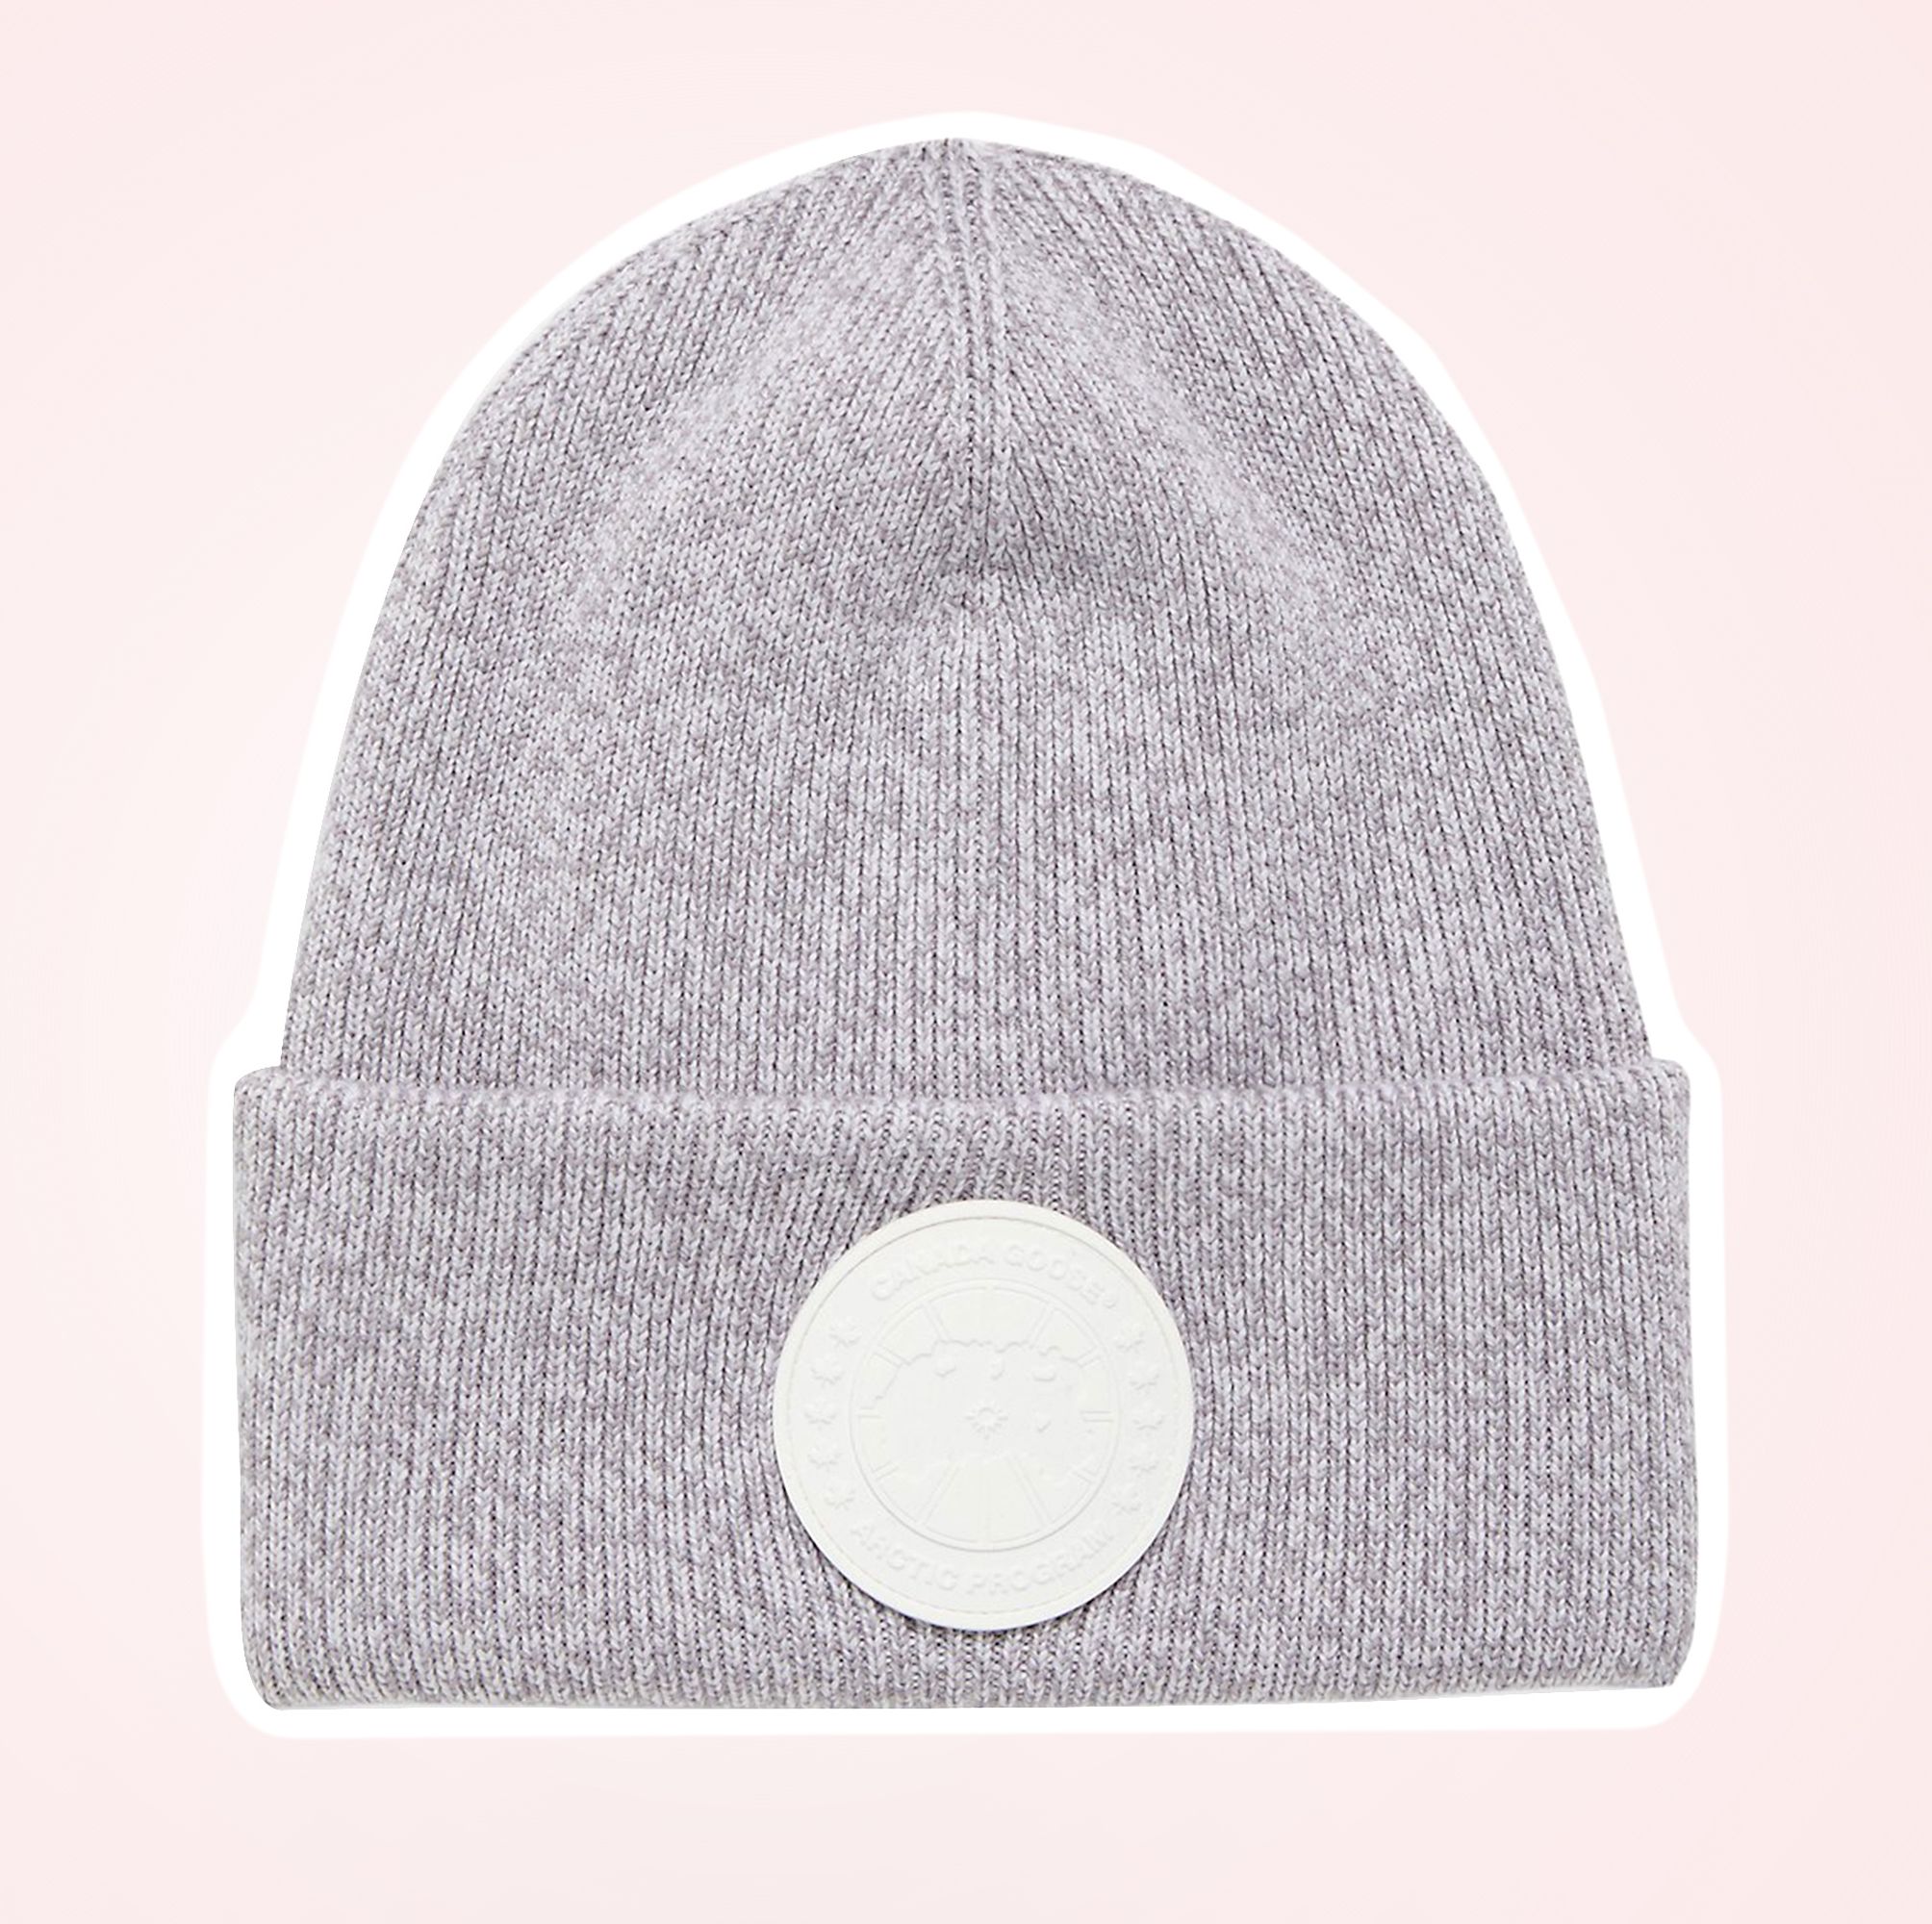 The Best Winter Beanies Will Heat Things Up